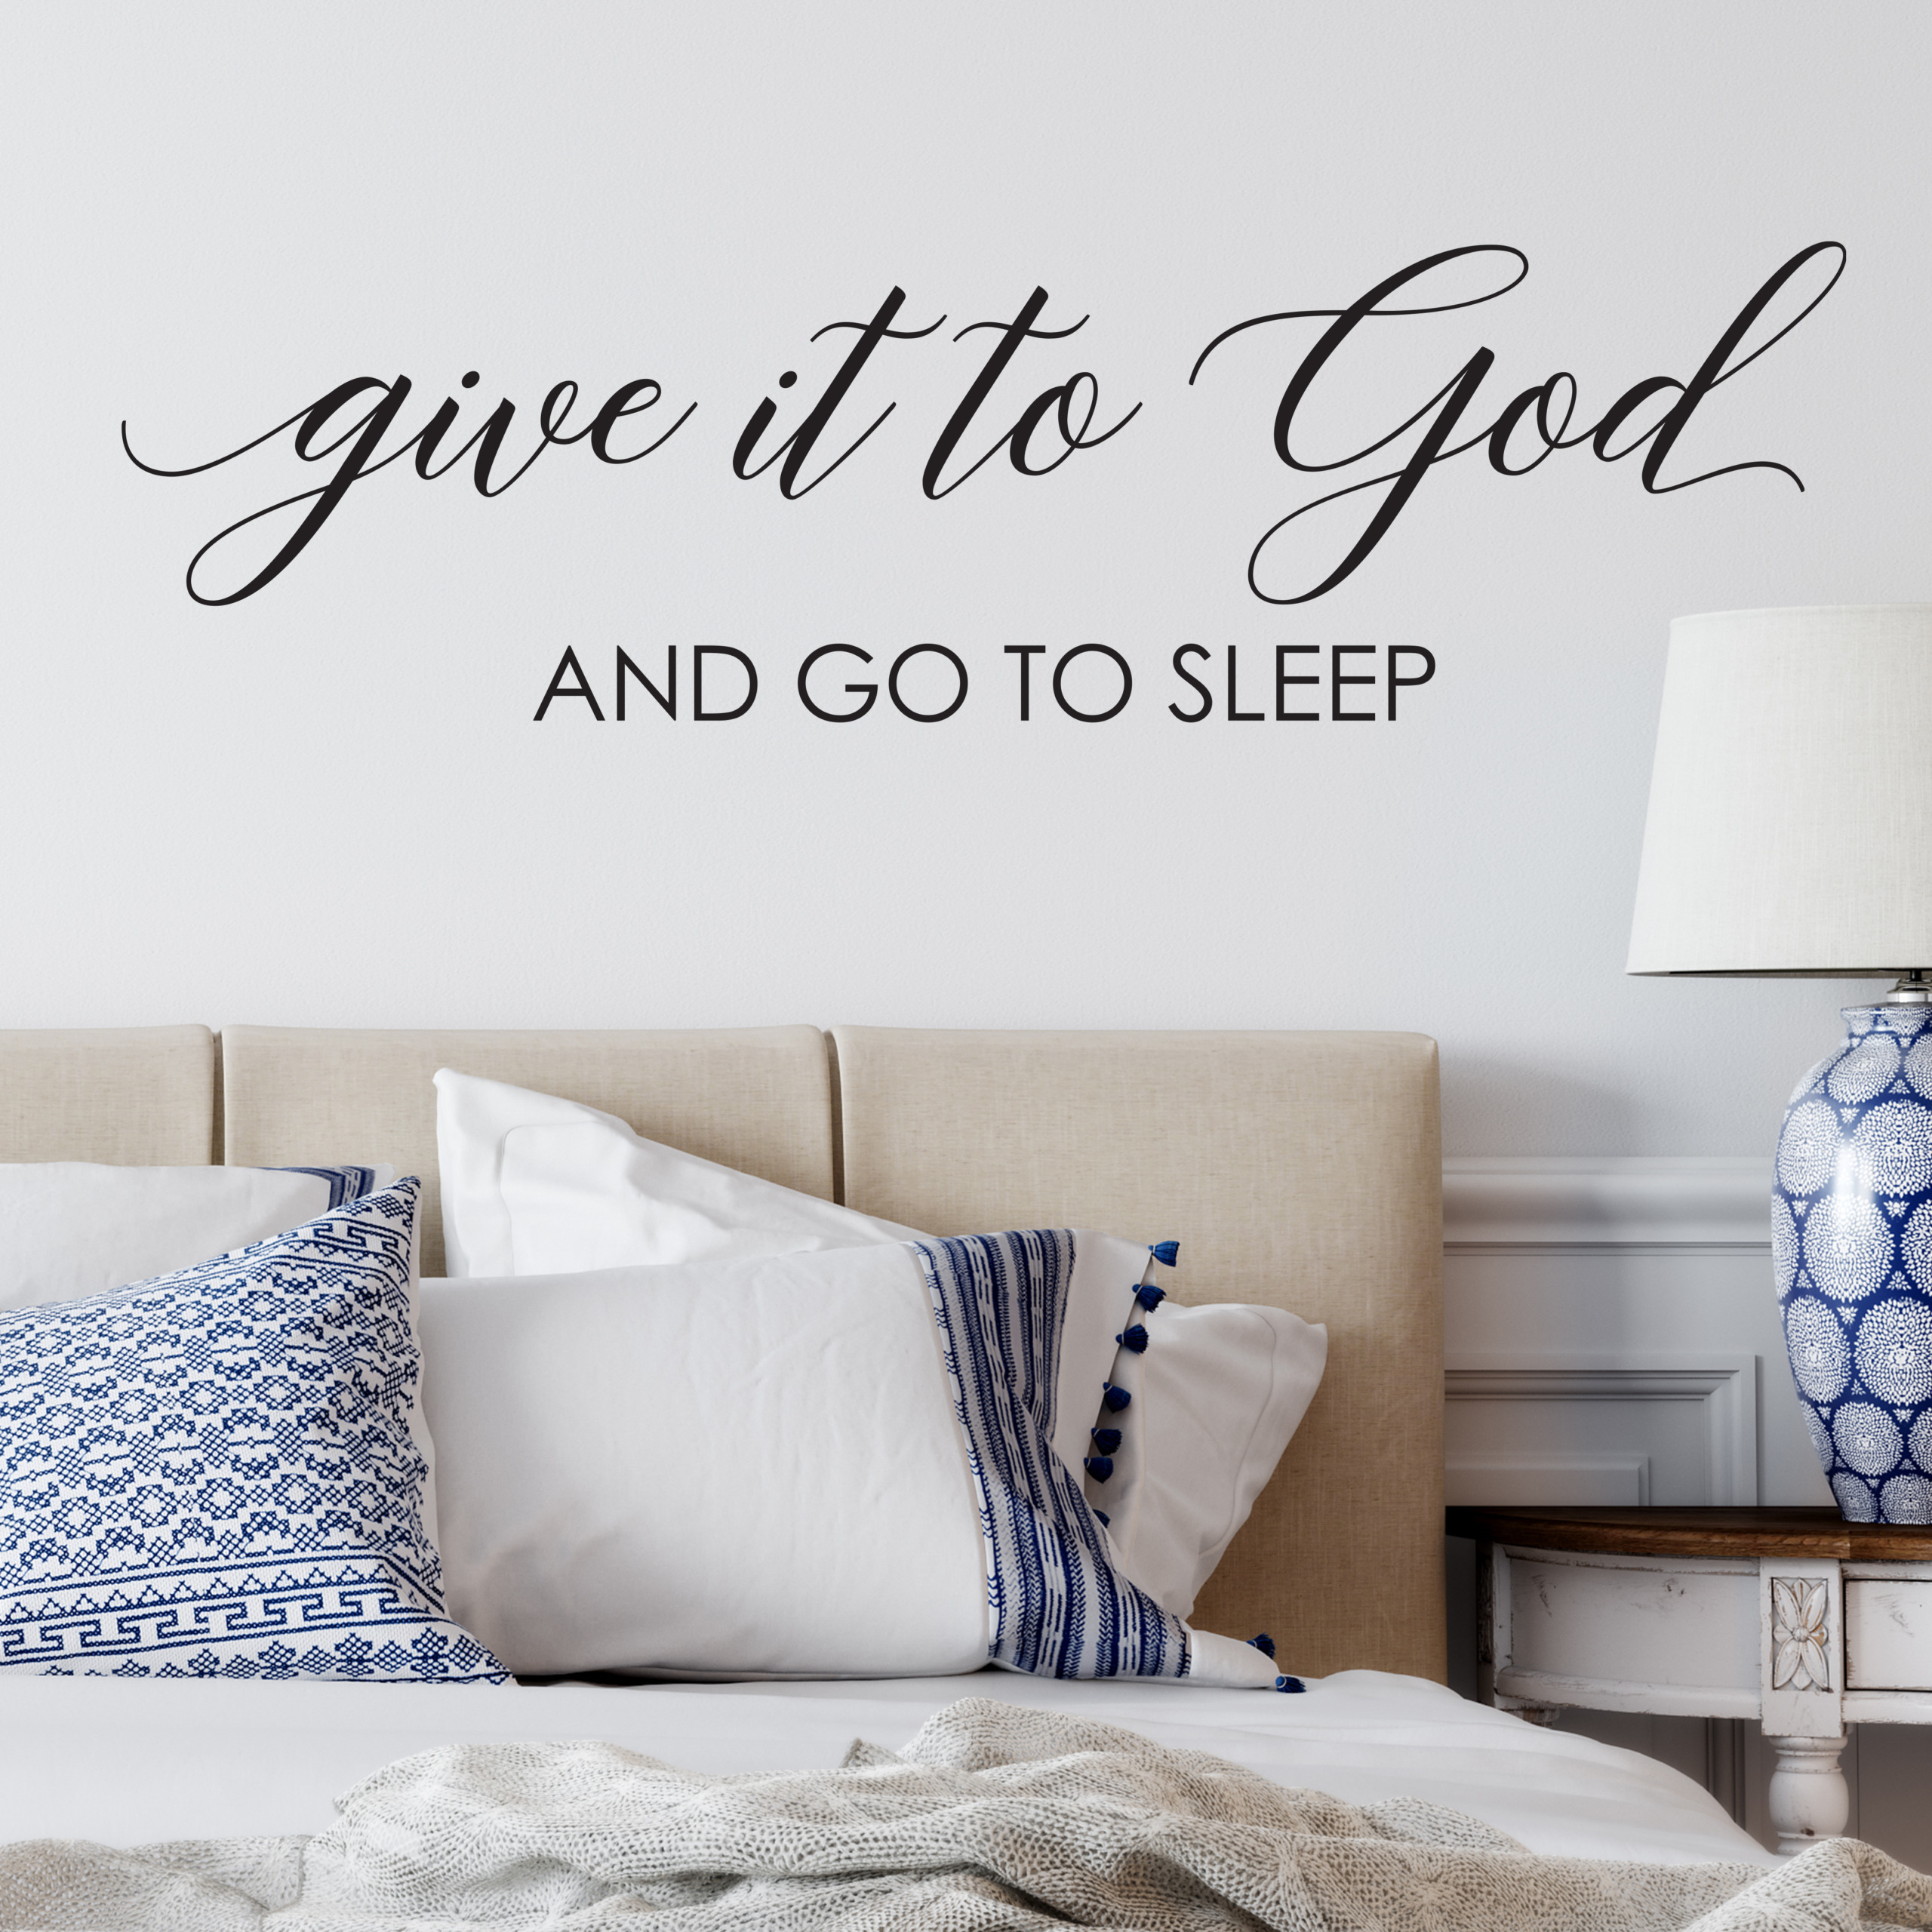 GIVE IT TO GOD AND GO TO SLEEP Vinyl Wall Decal Decor Words Home Saying Quote 